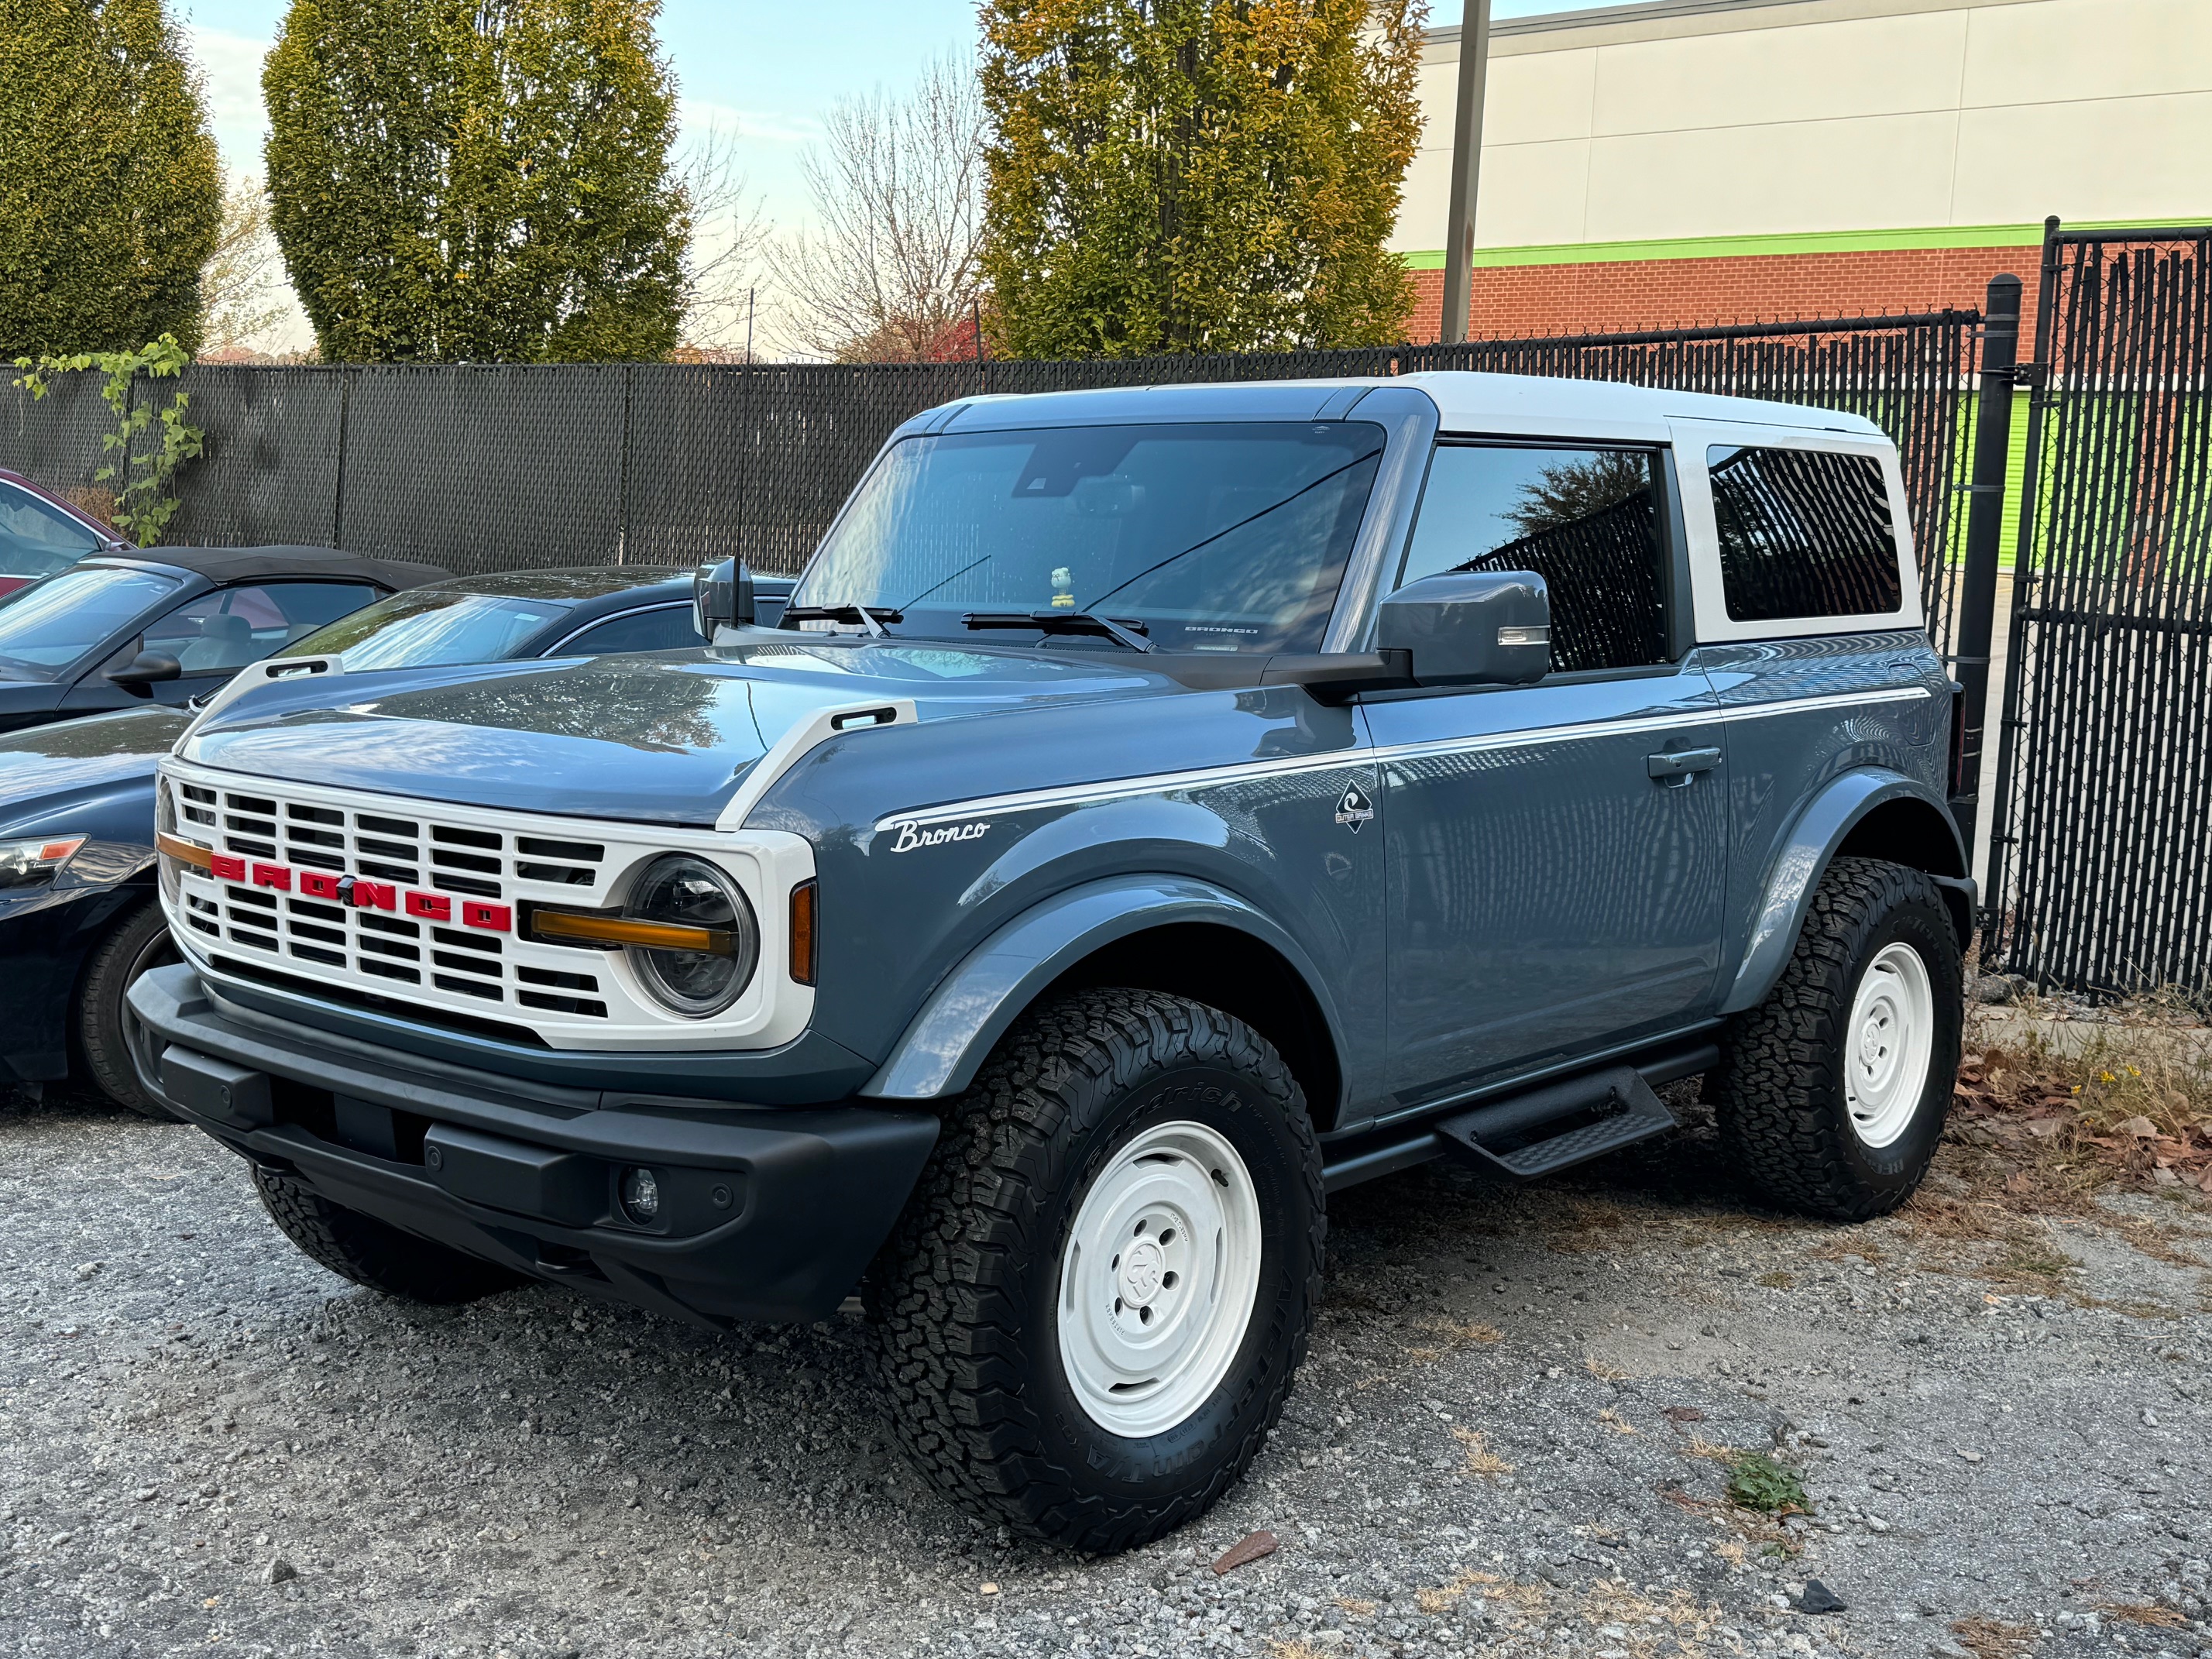 Ford Bronco Show 33's some love picture thread IMG_0143 (1)